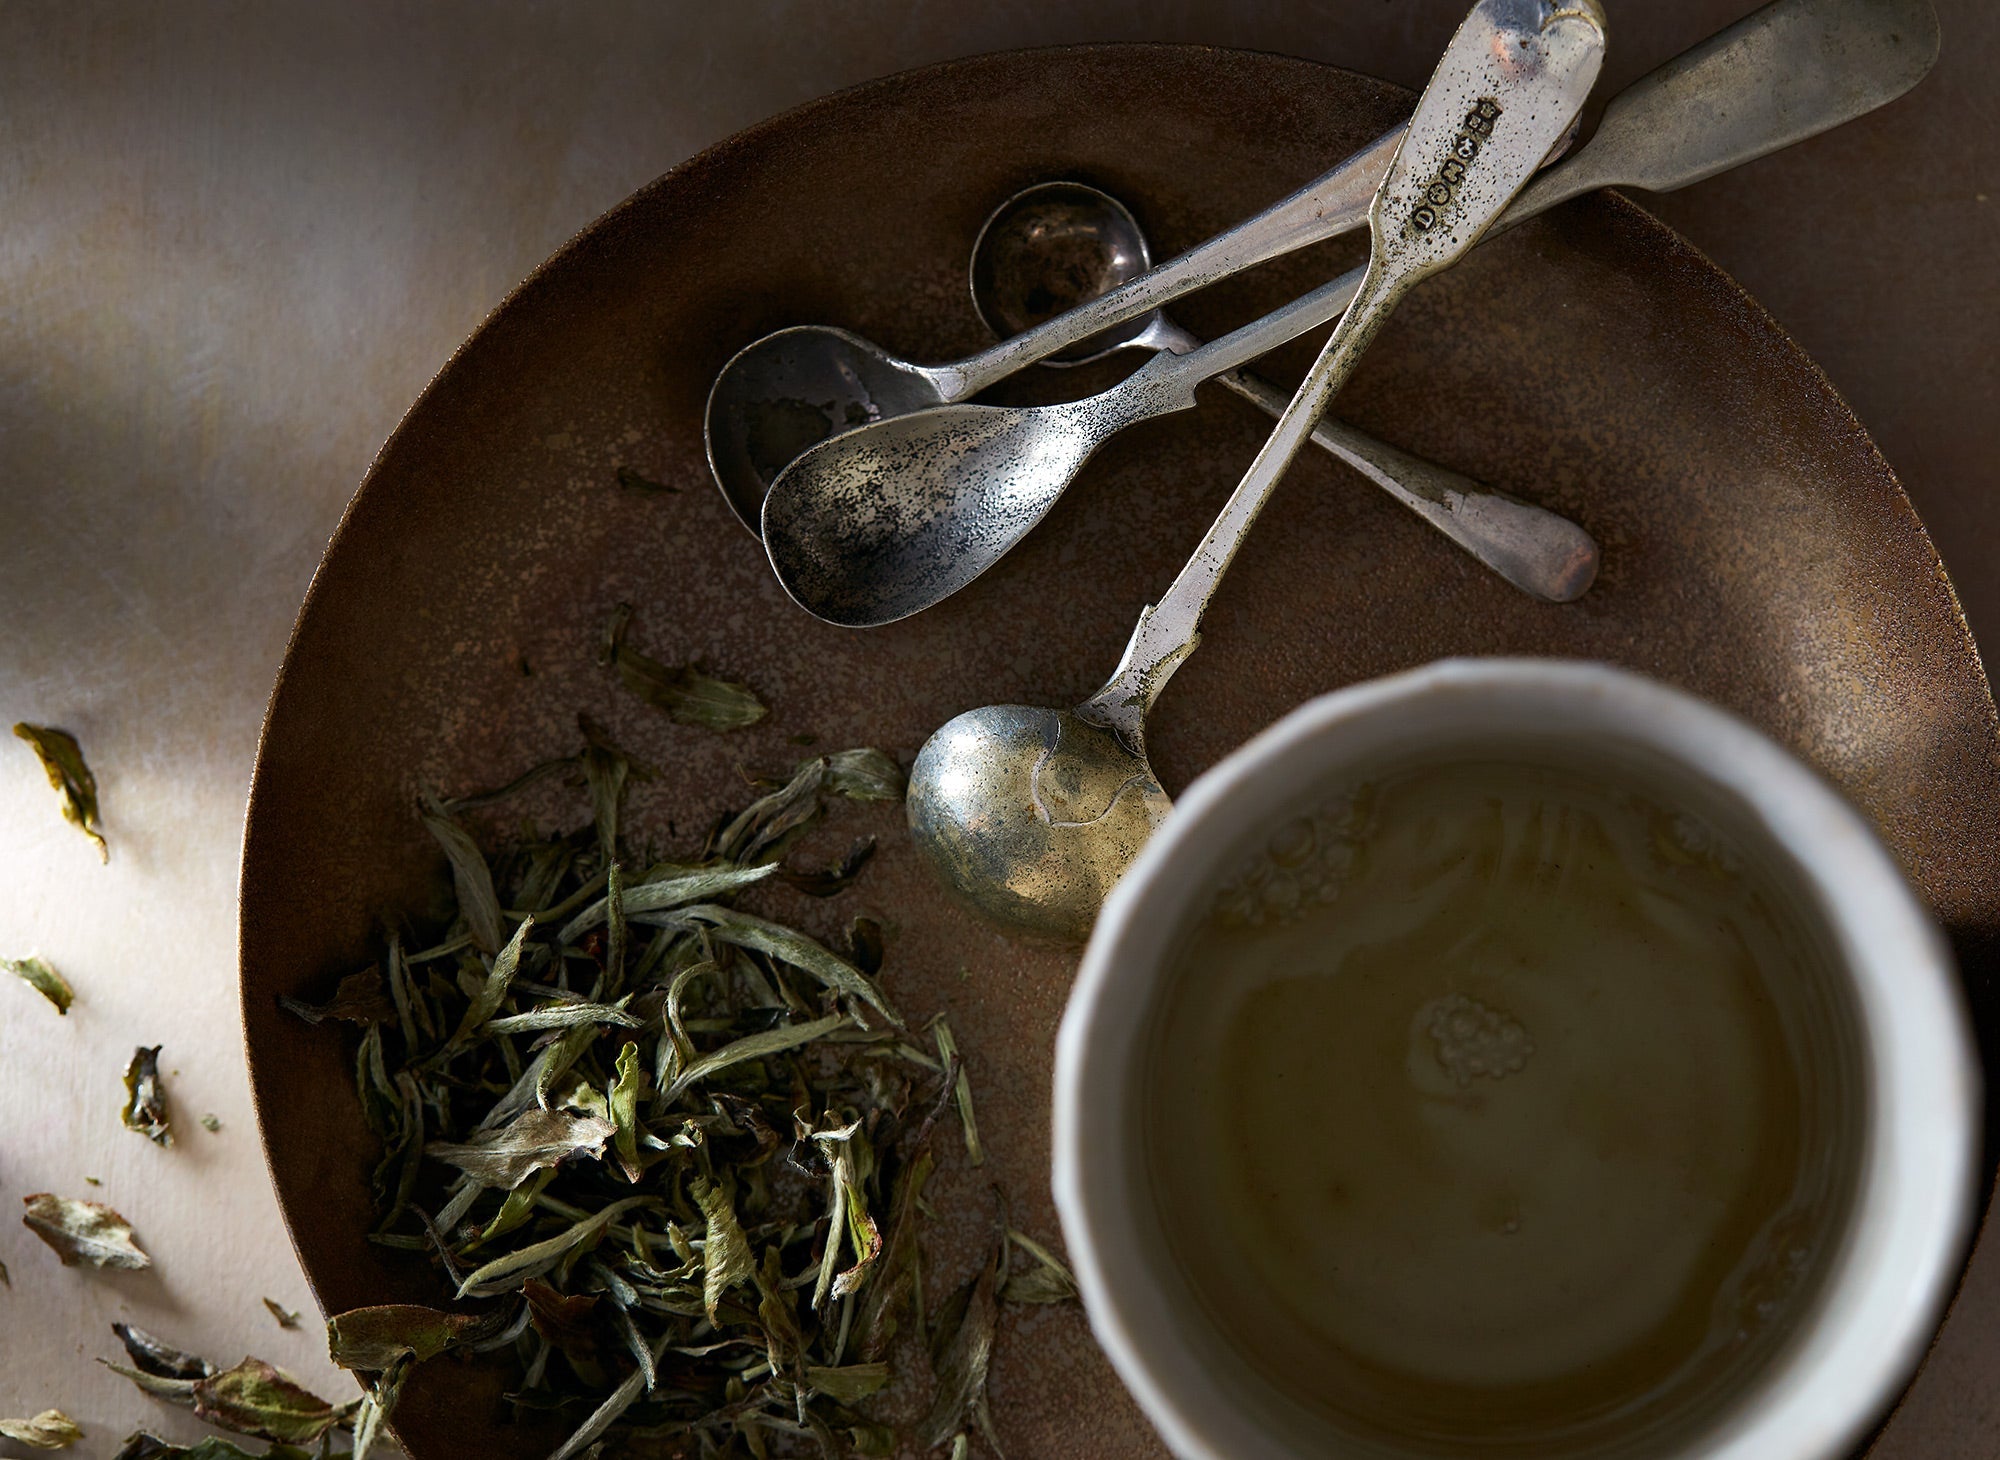 Discover premium loose leaf white tea from BELLOCQ and elevate your everyday rituals. Free U.S. shipping available.